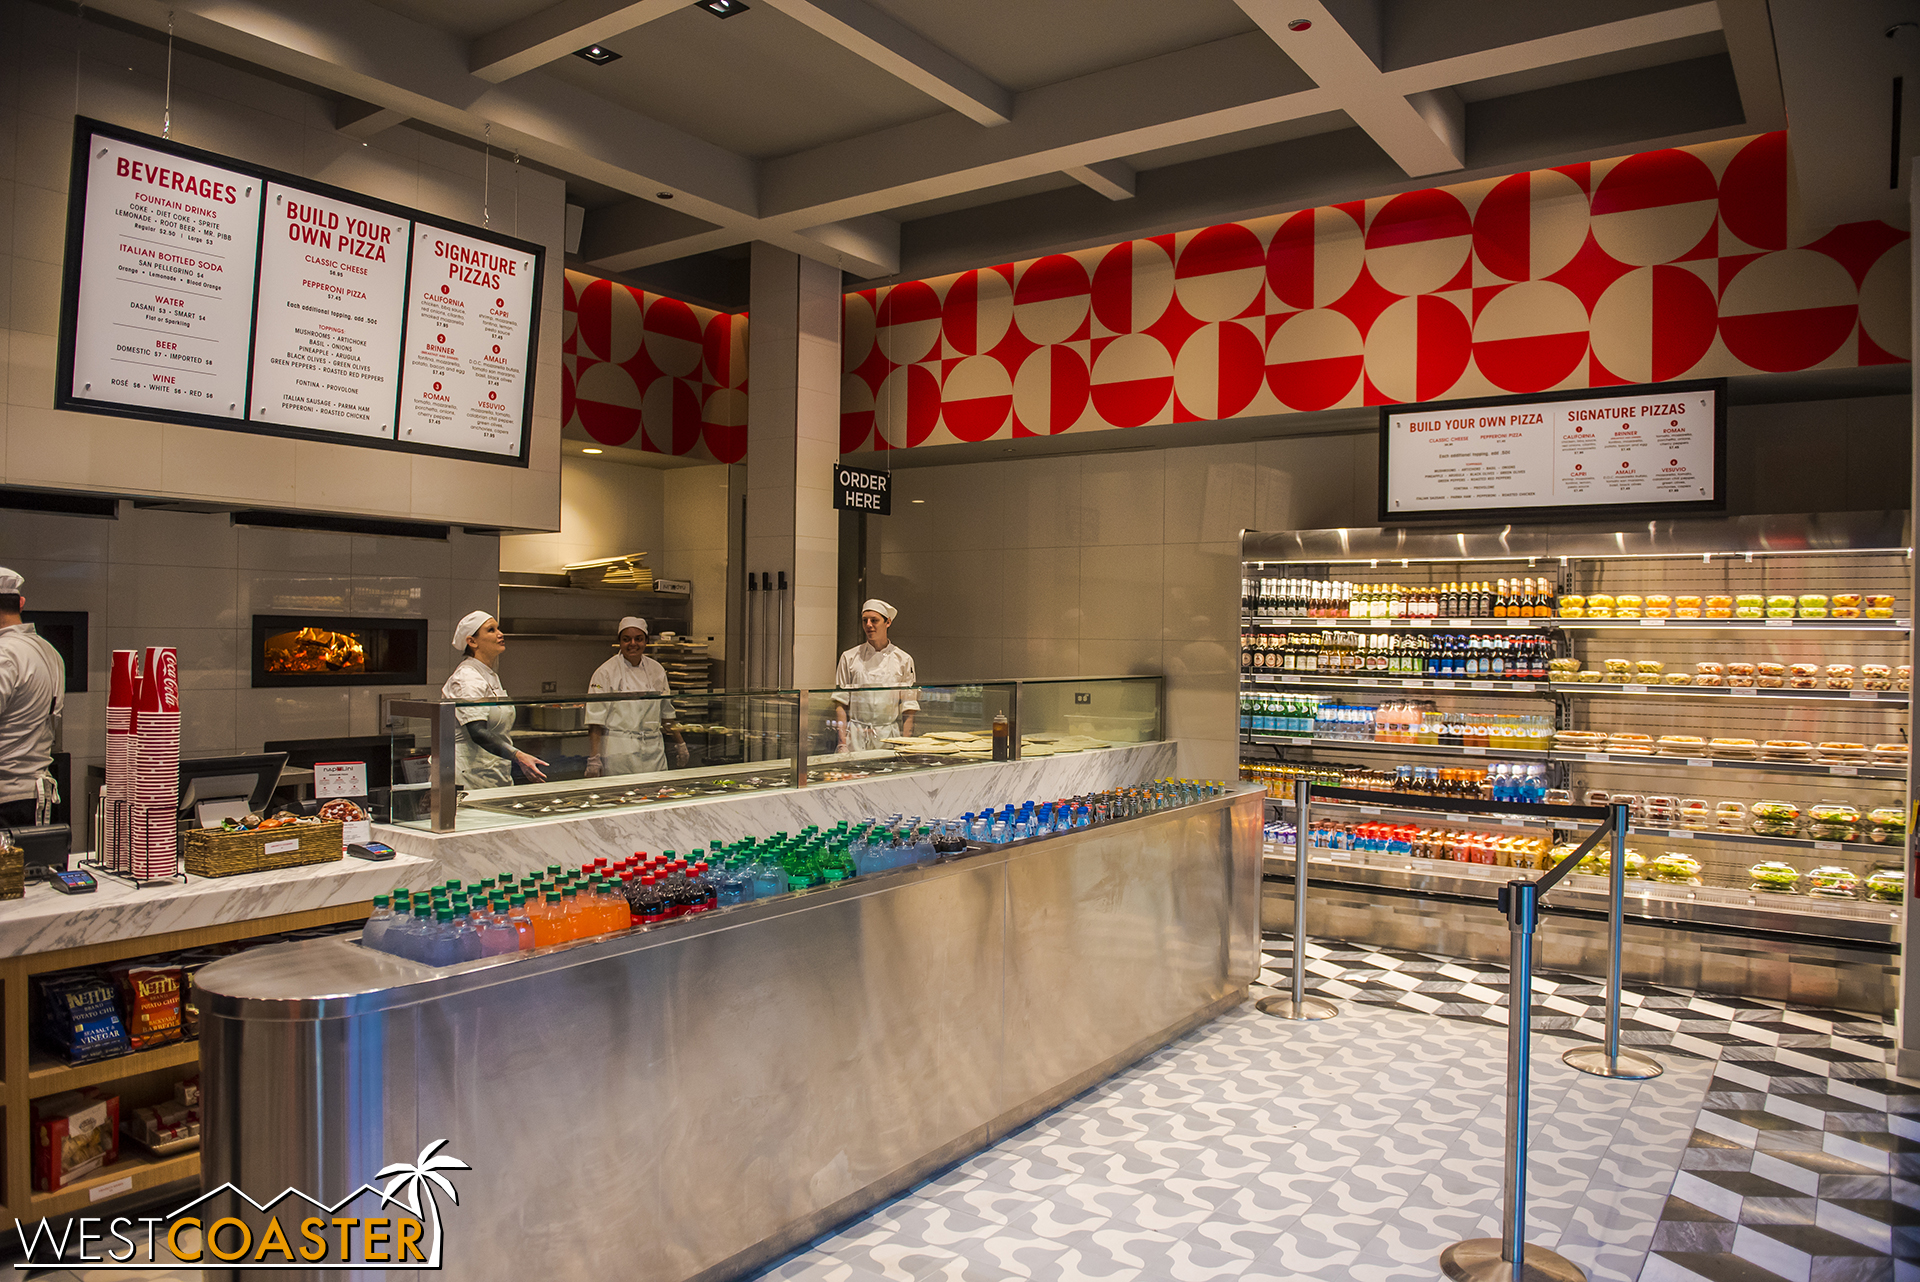  Inside, you can find a fast food “build your own pizza” style diner, similar to Blaze Pizza and similar establishments. 